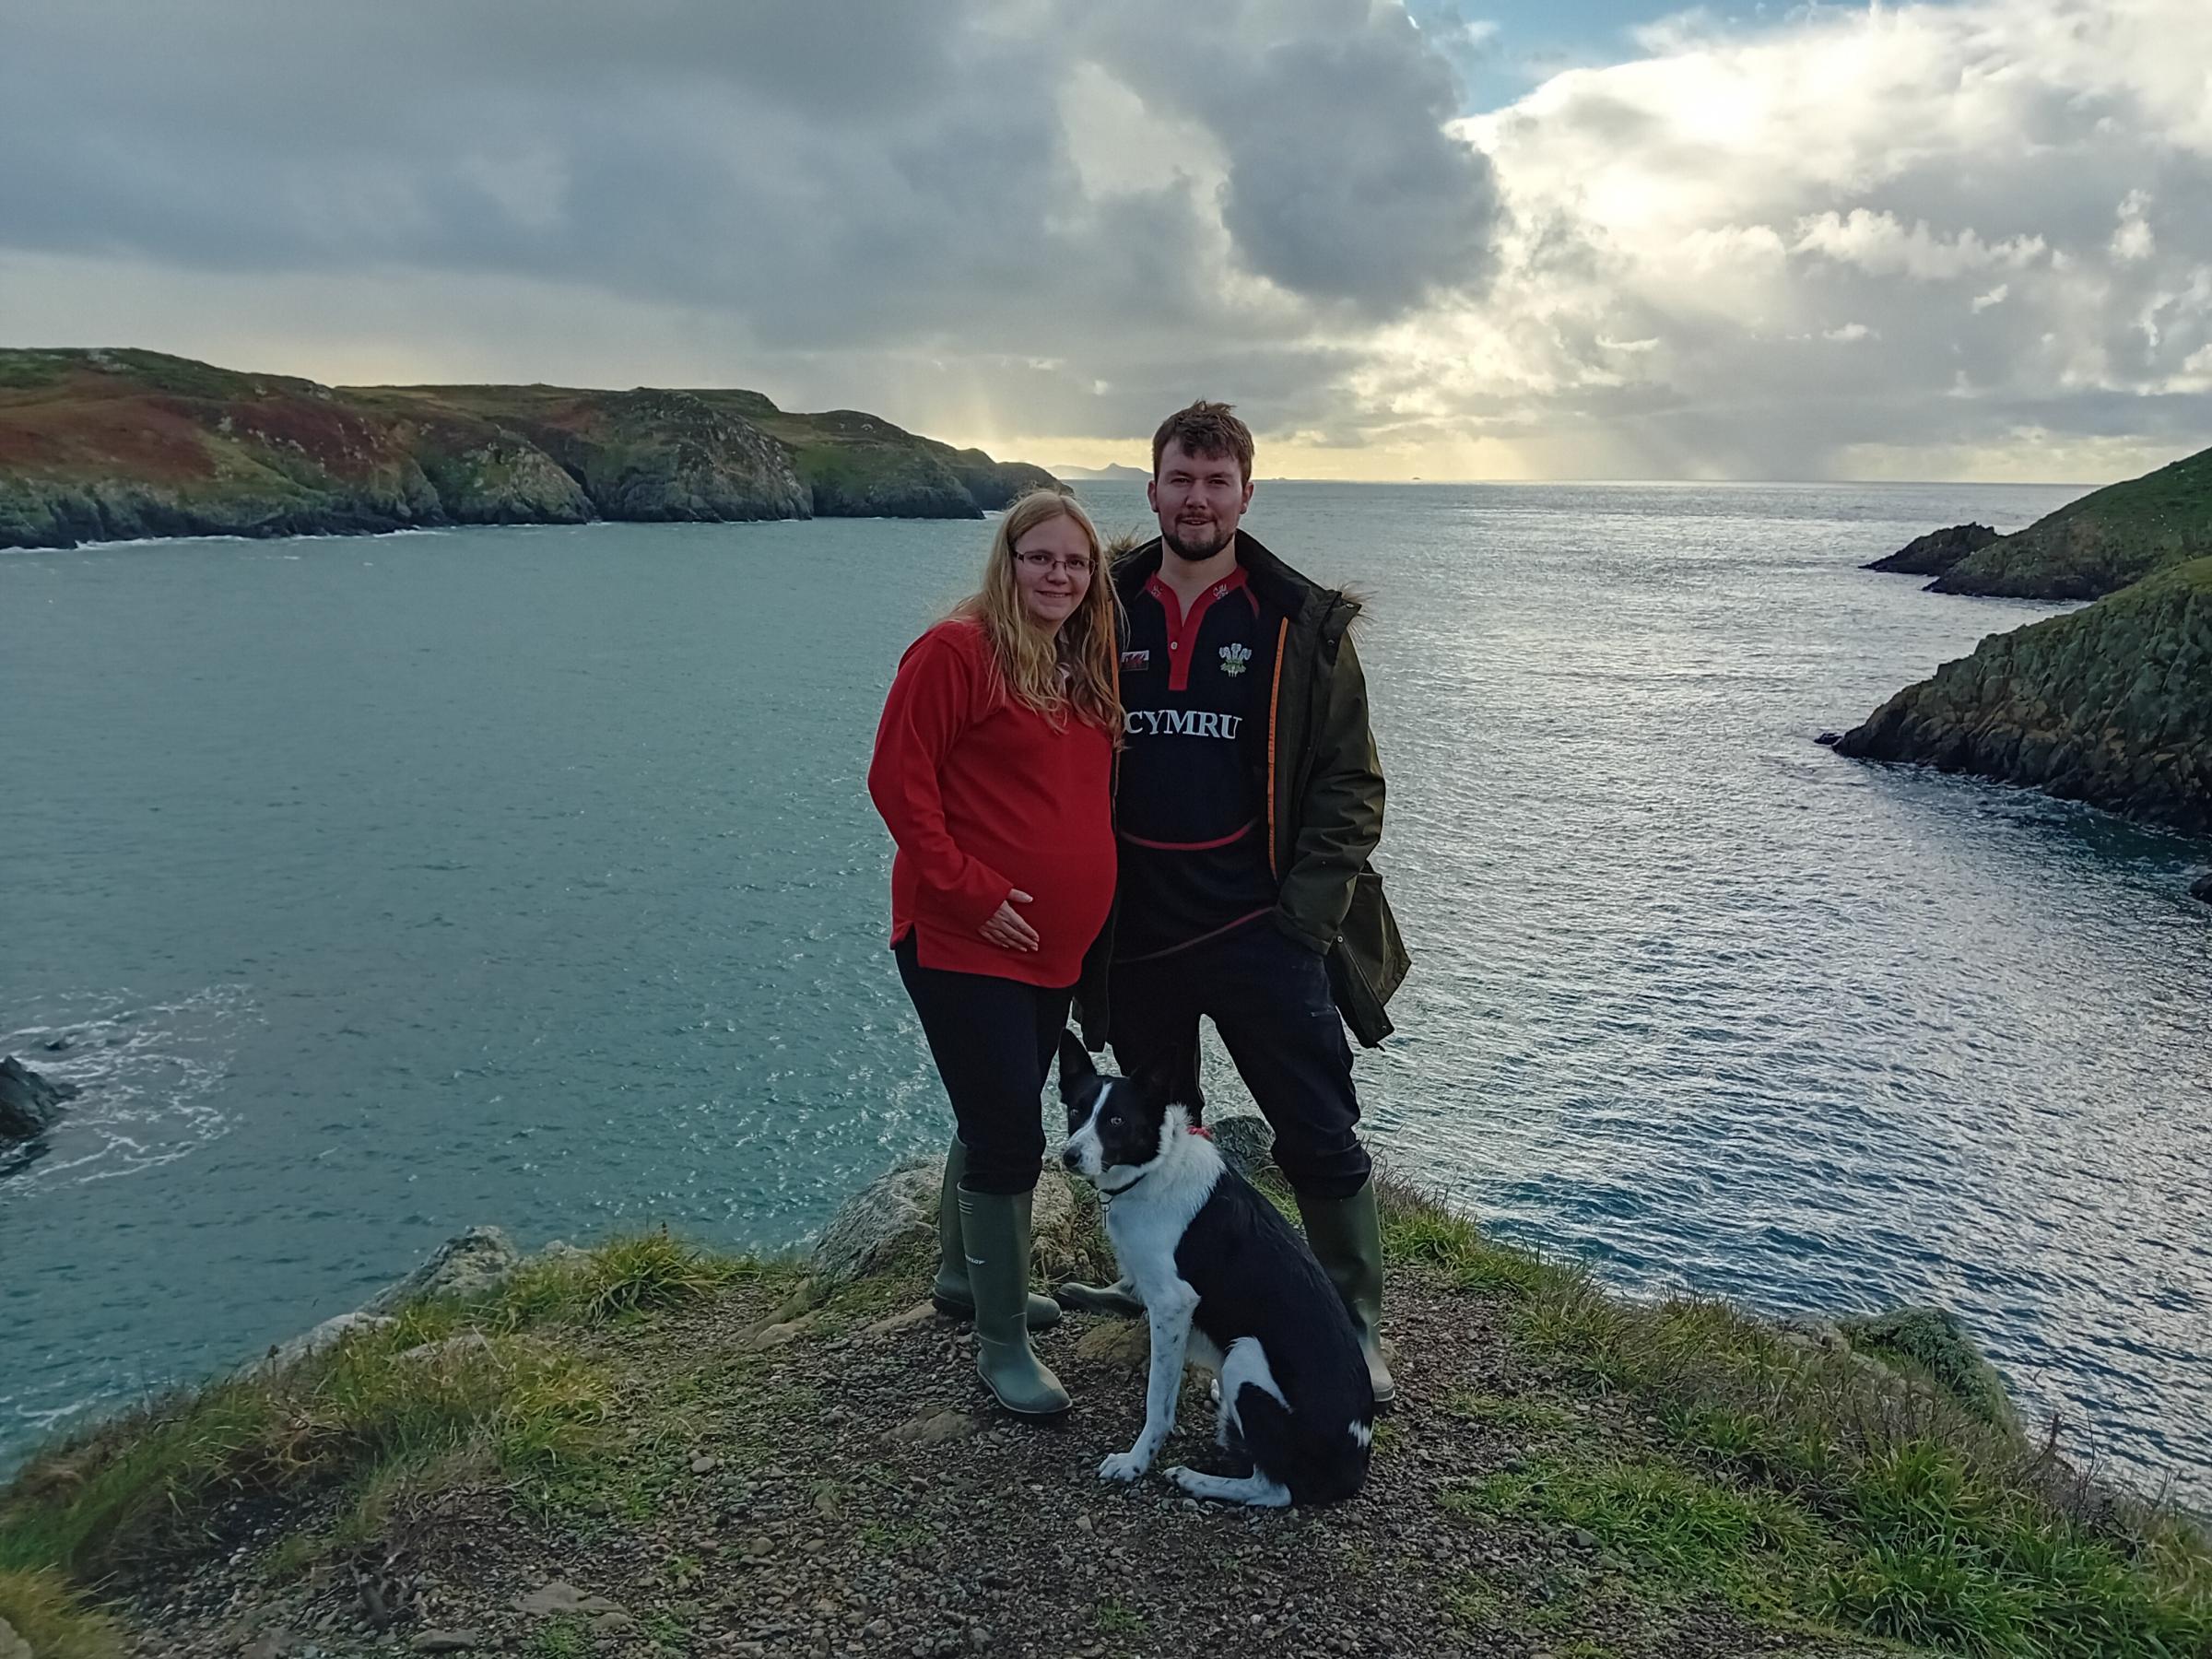 Honeymoon in Pembrokeshire for Lucy and Tom Bates.